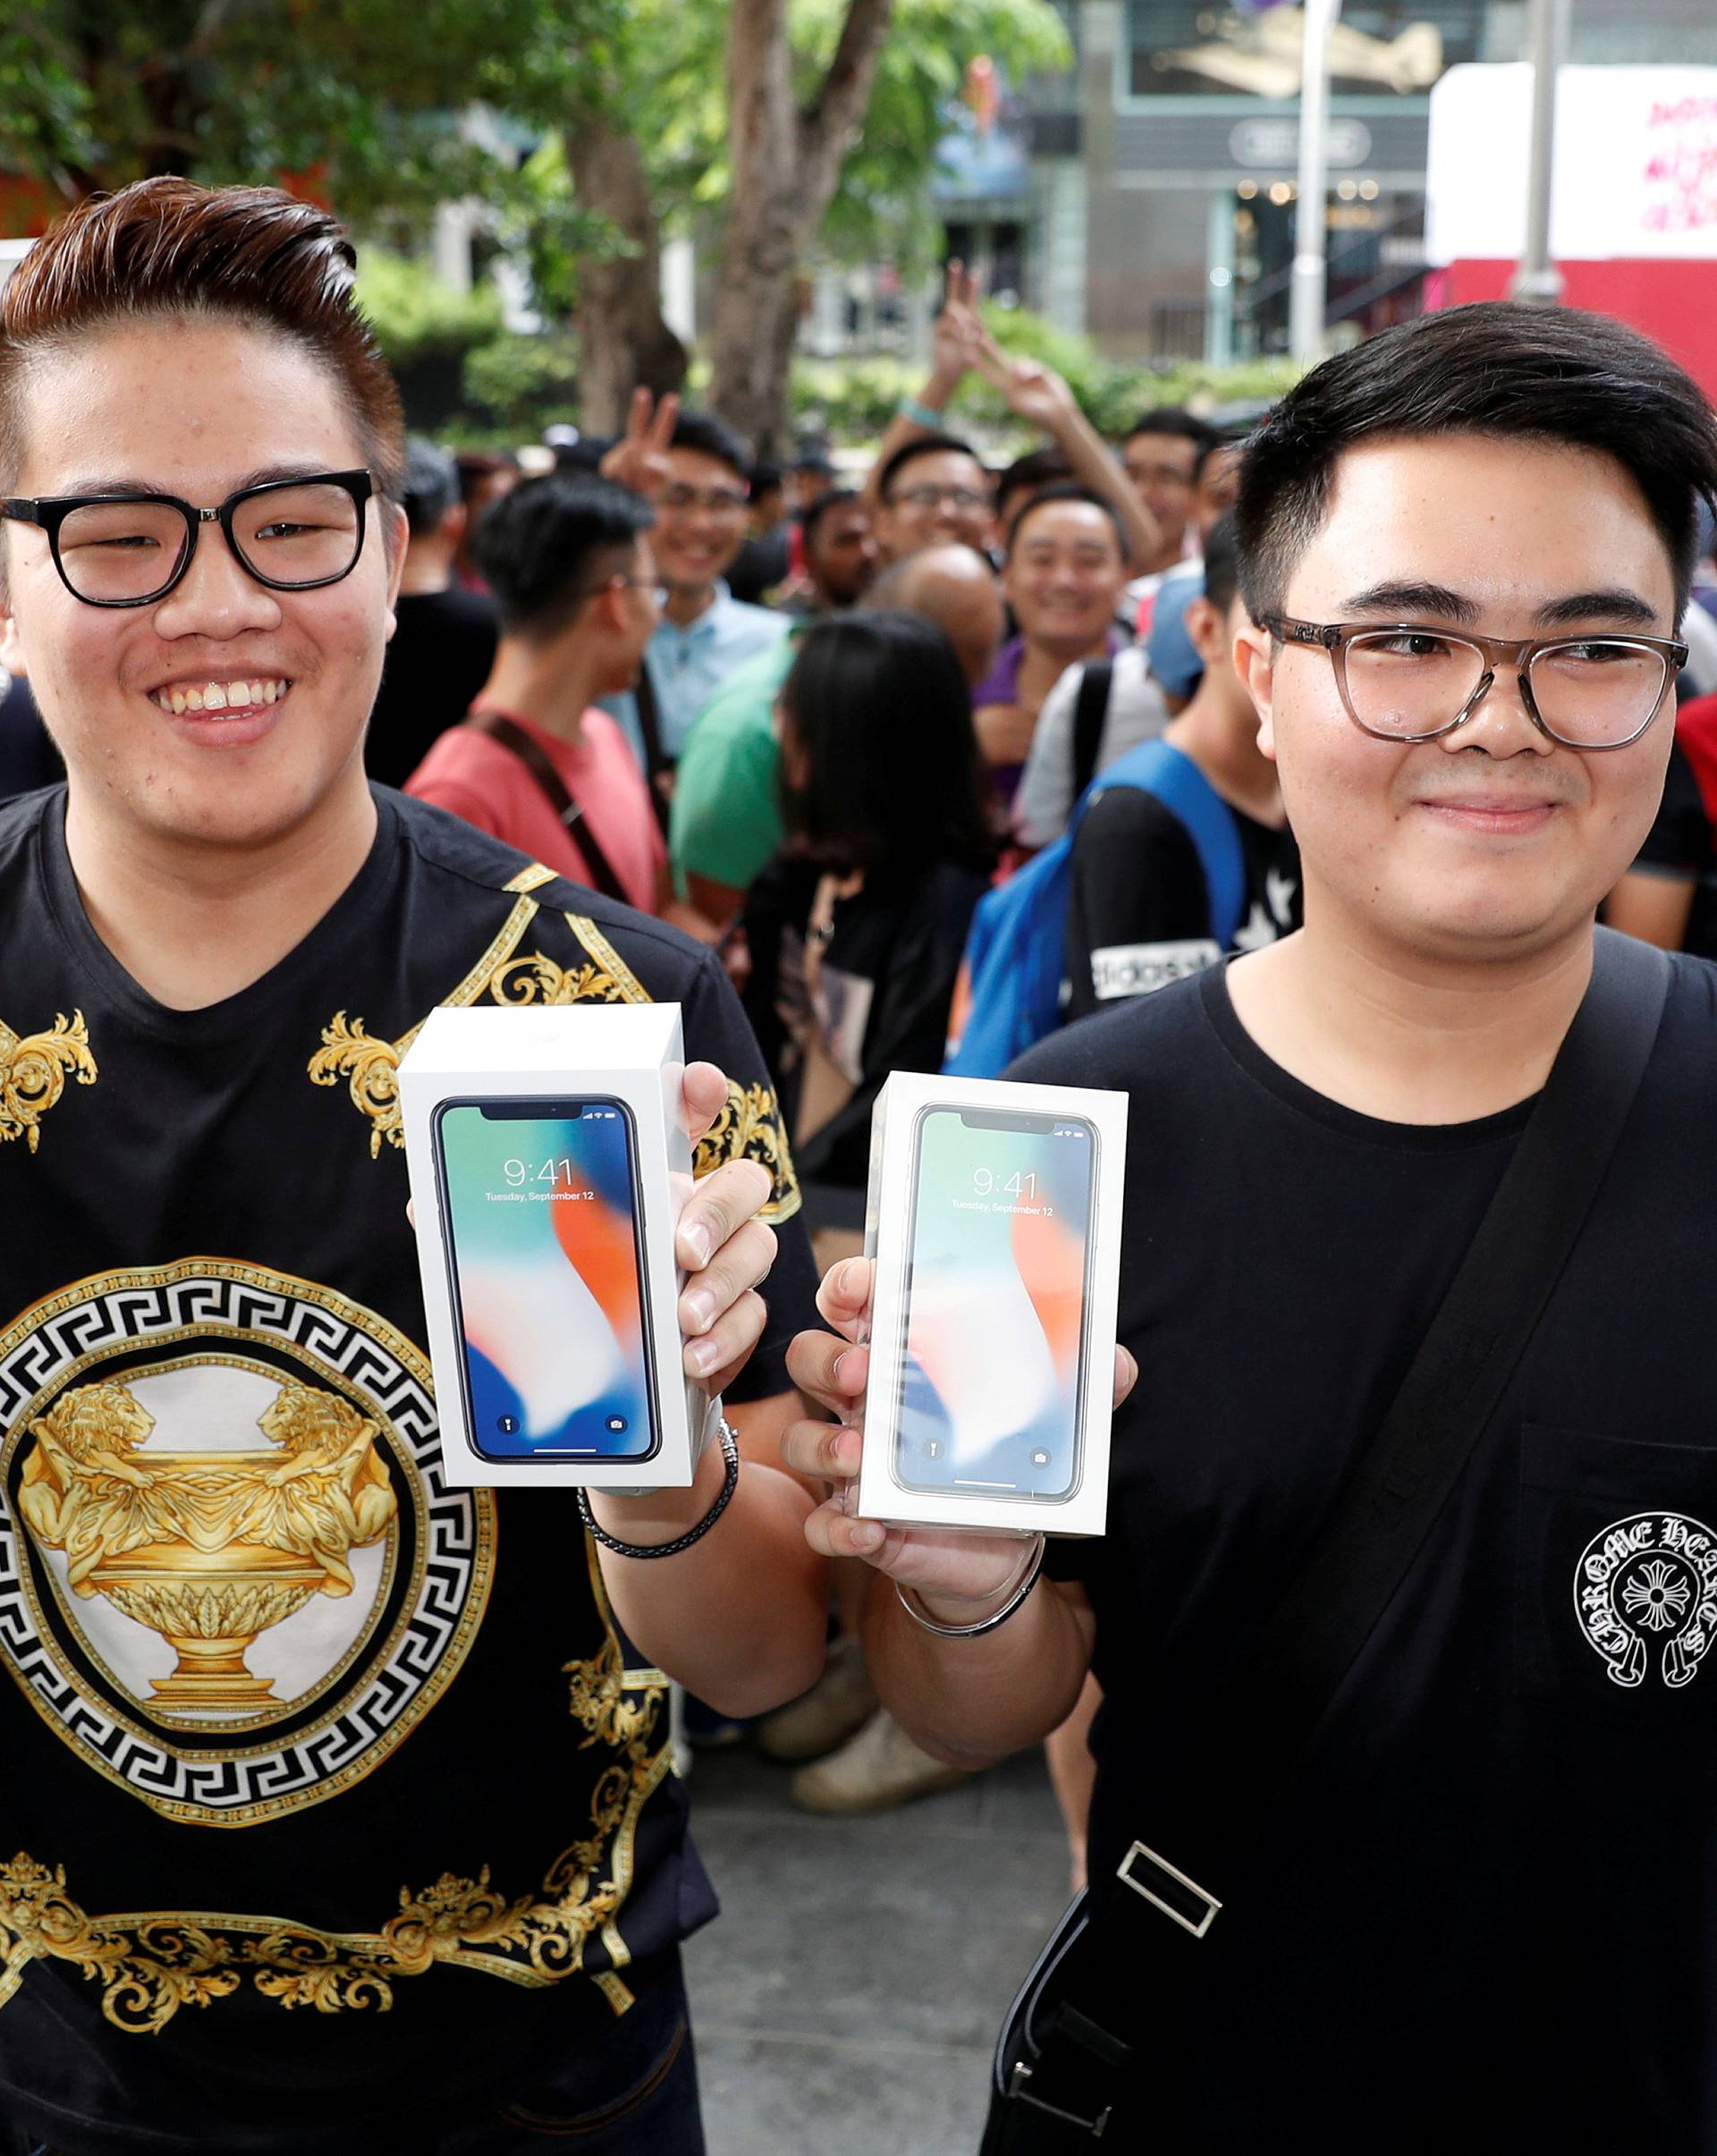 First customers to buy iPhone X Kittiwat Wang, 22, and Mod, 22, of Bangkok pose with their iPhone X at the Apple store in Singapore